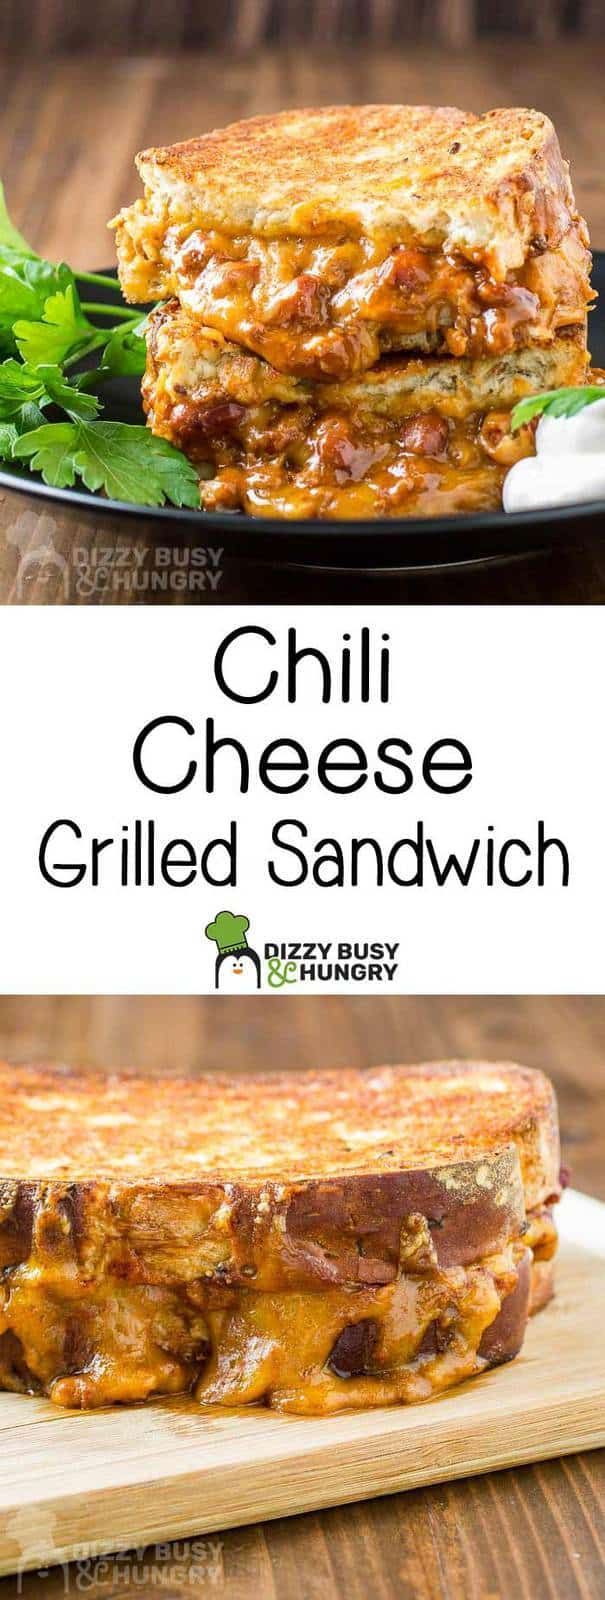 Chili Cheese Grilled Sandwiches -   14 grilled sandwich recipes
 ideas